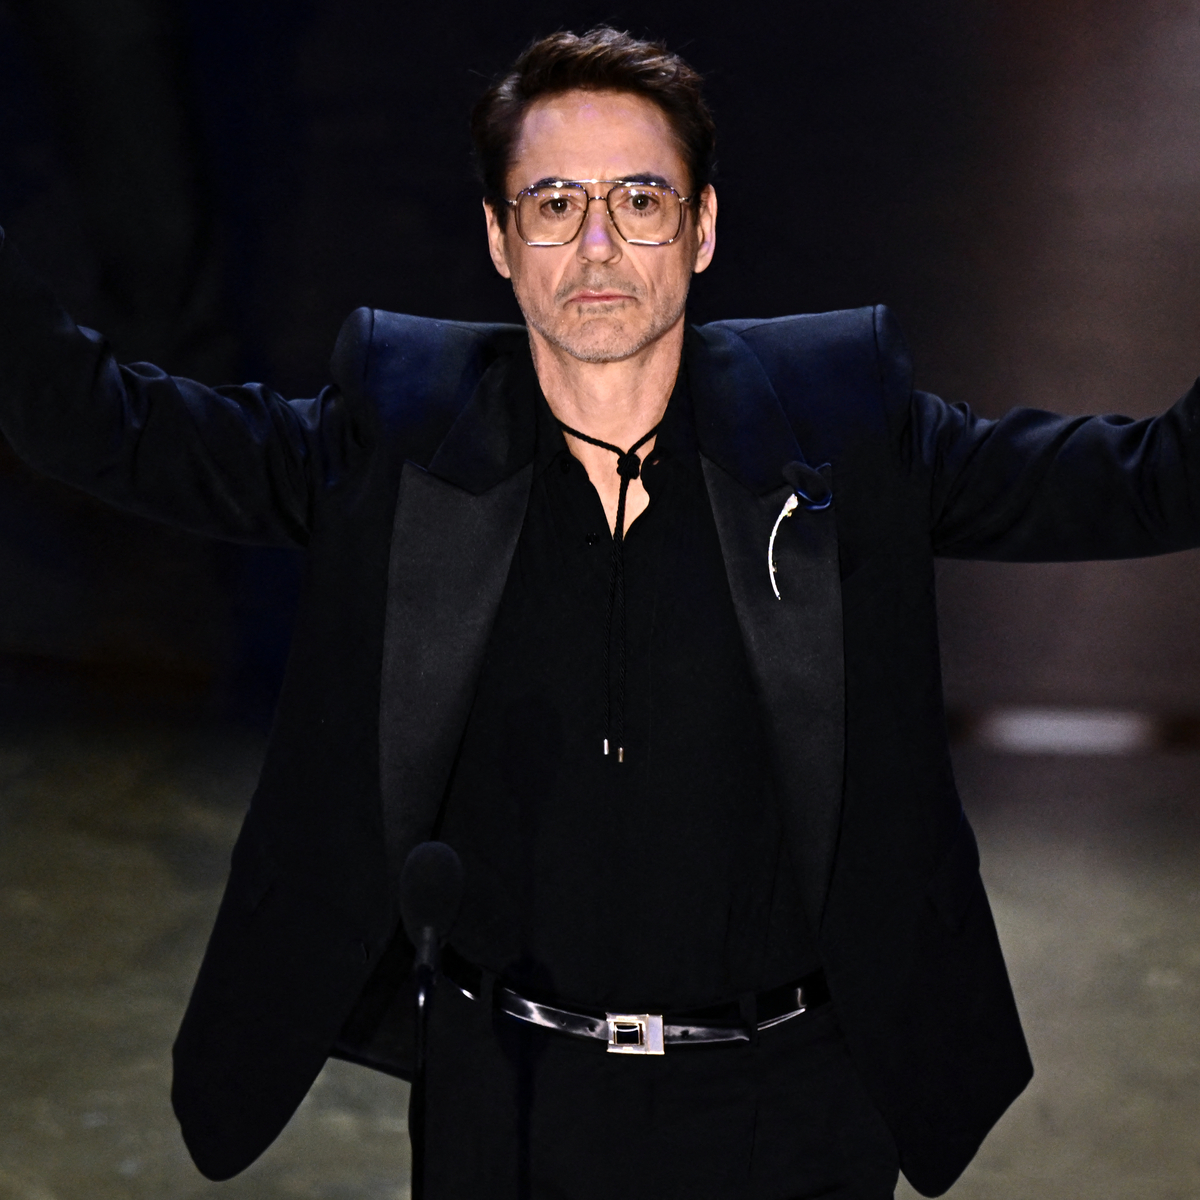 Robert Downey Jr wins his first Oscar for Best Supporting Actor